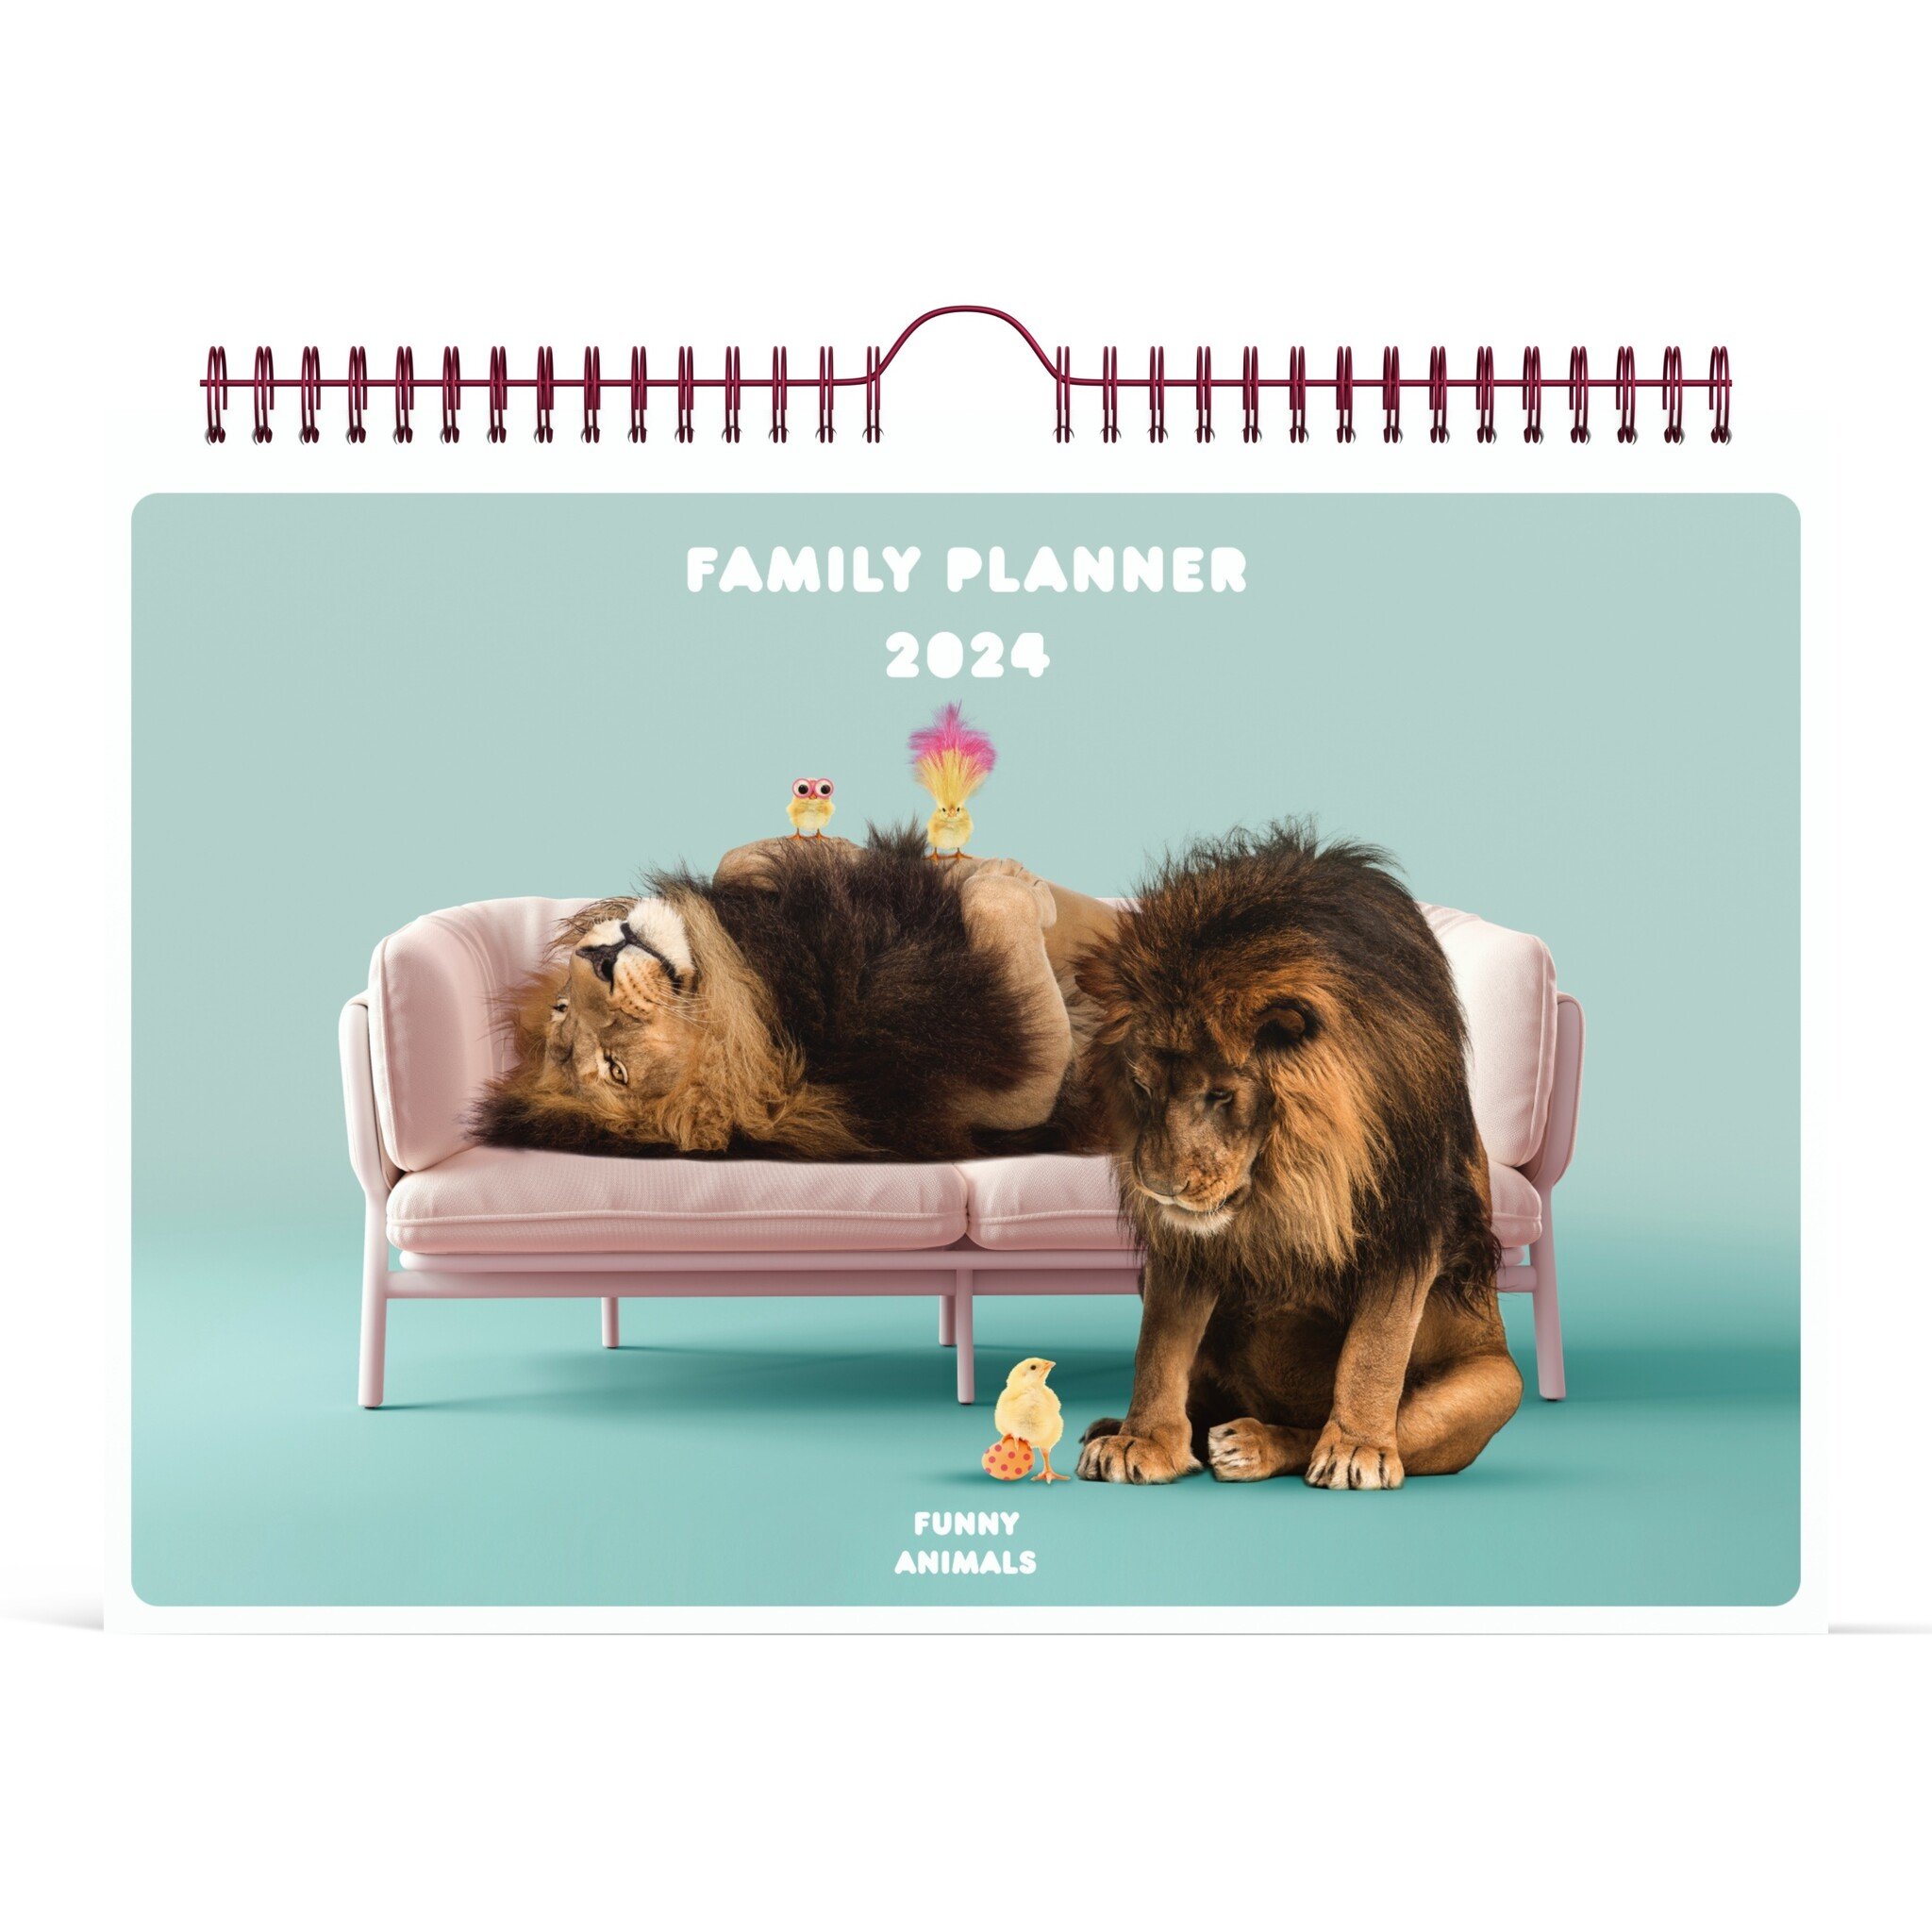 Lannoo Graphics - Family Calender - Familie kalender - 2024 - FUNNY ANIMALS - Lions - 4 Talig - 310 x 220 mm